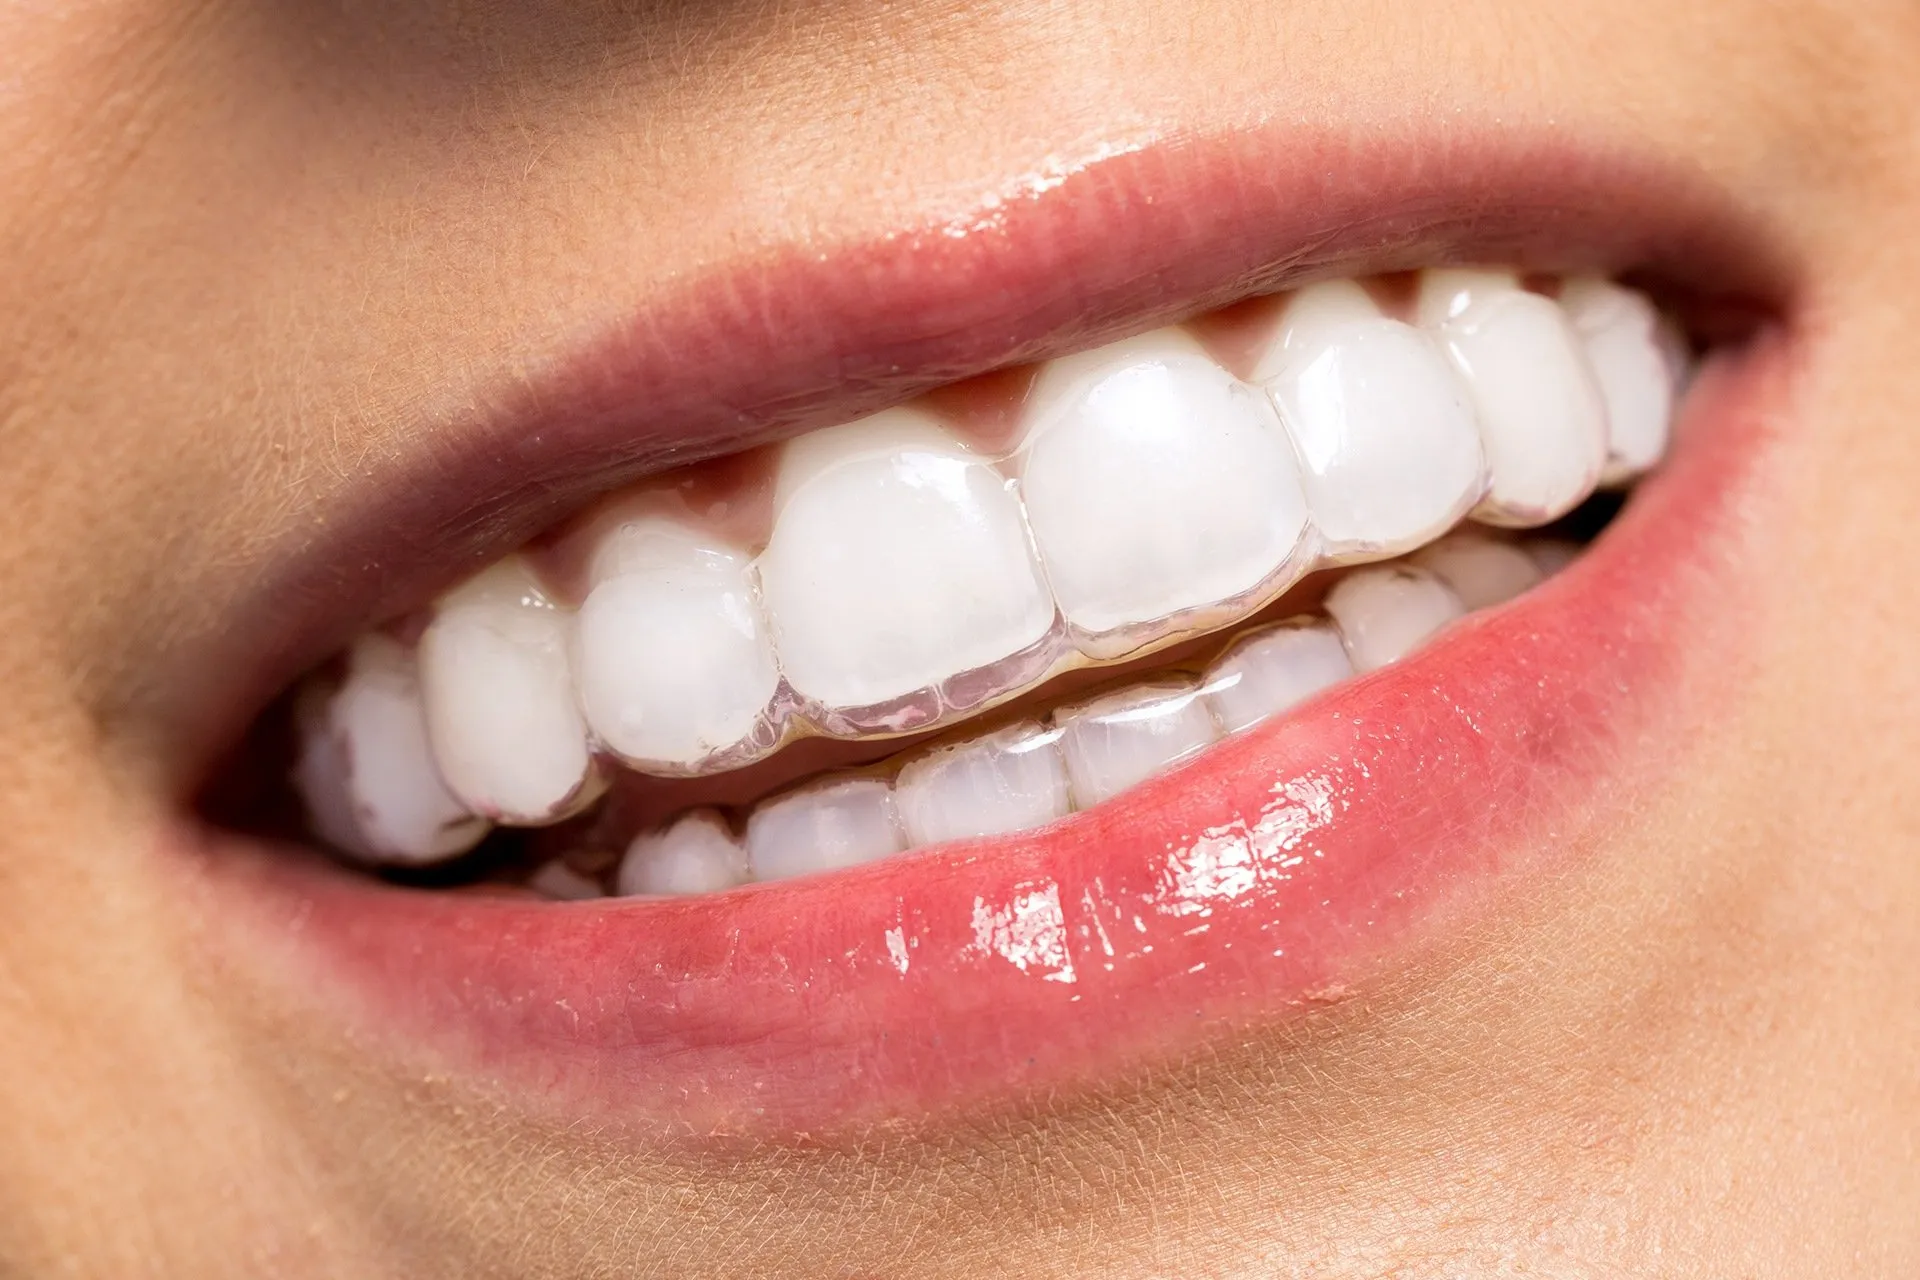 What is the difference between at-home clear aligners and regular braces?